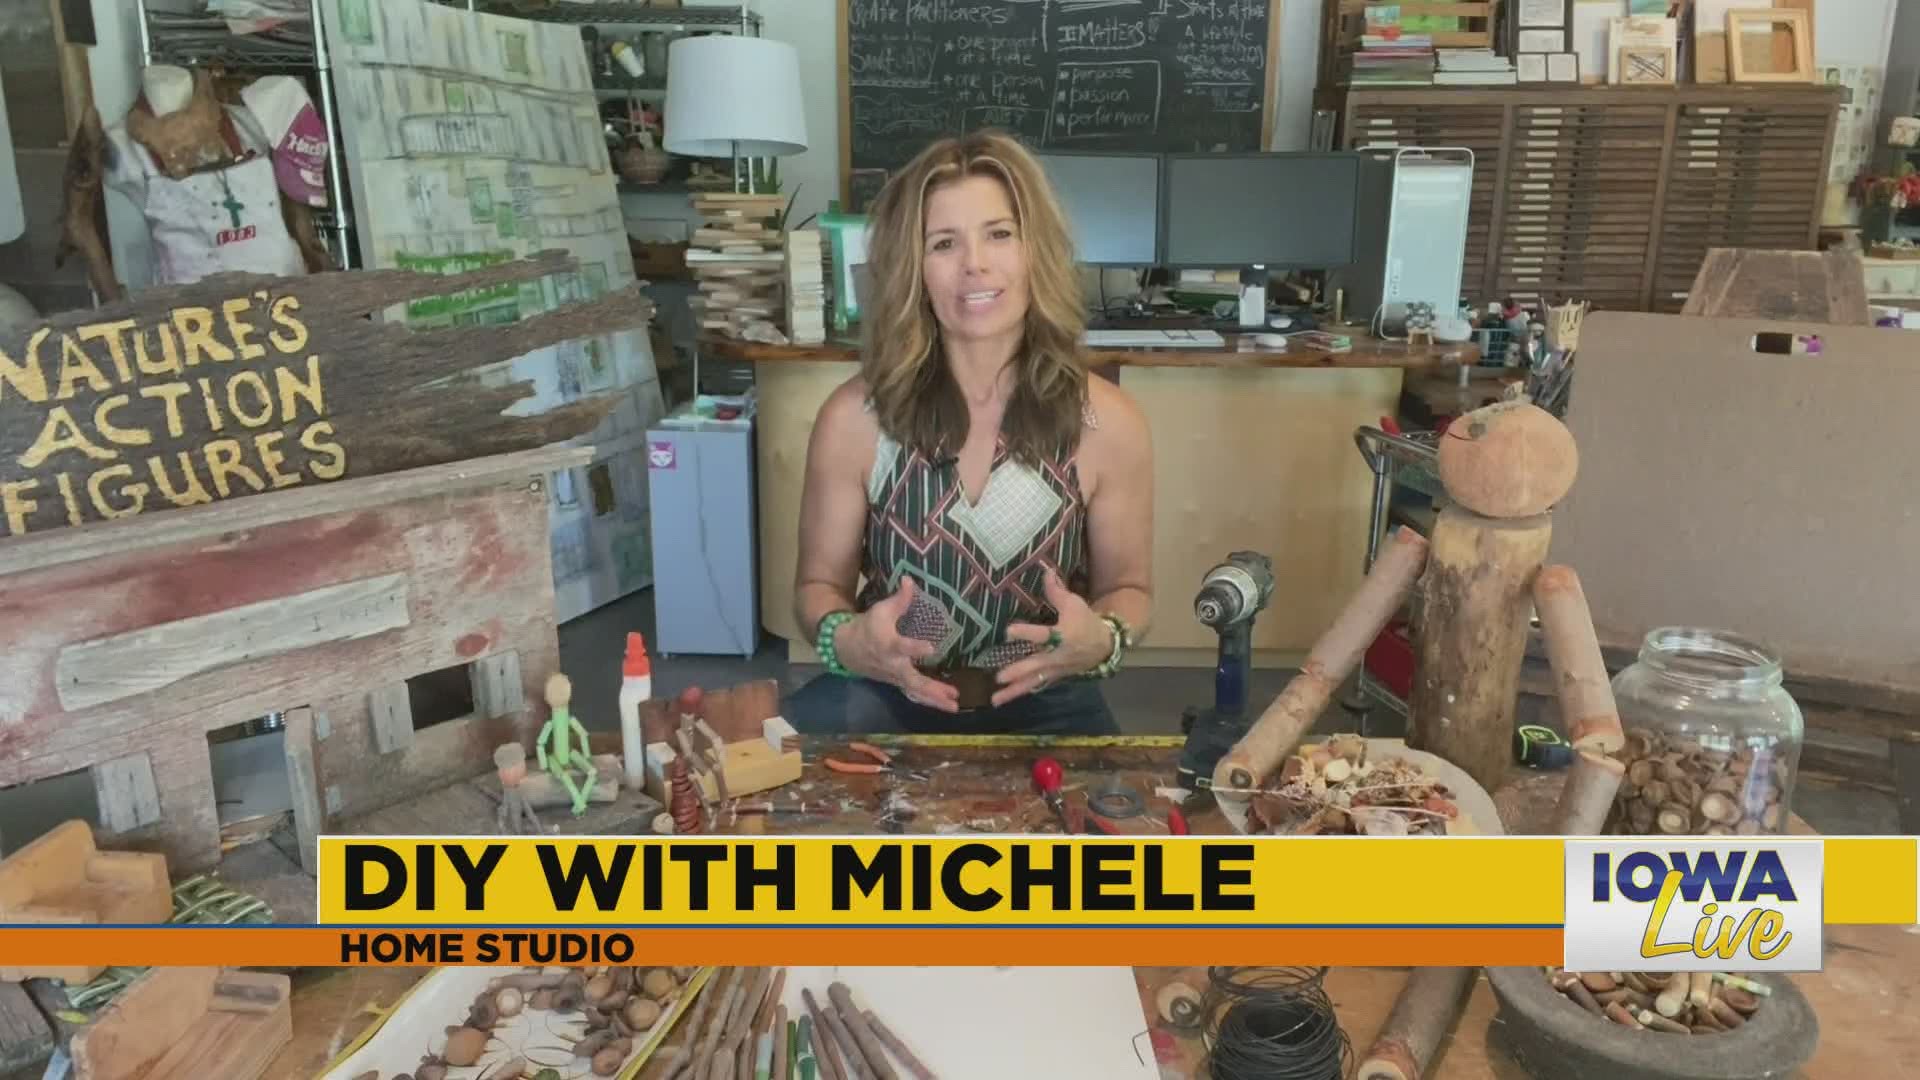 Michele creates action figures this morning on 'Iowa Live'